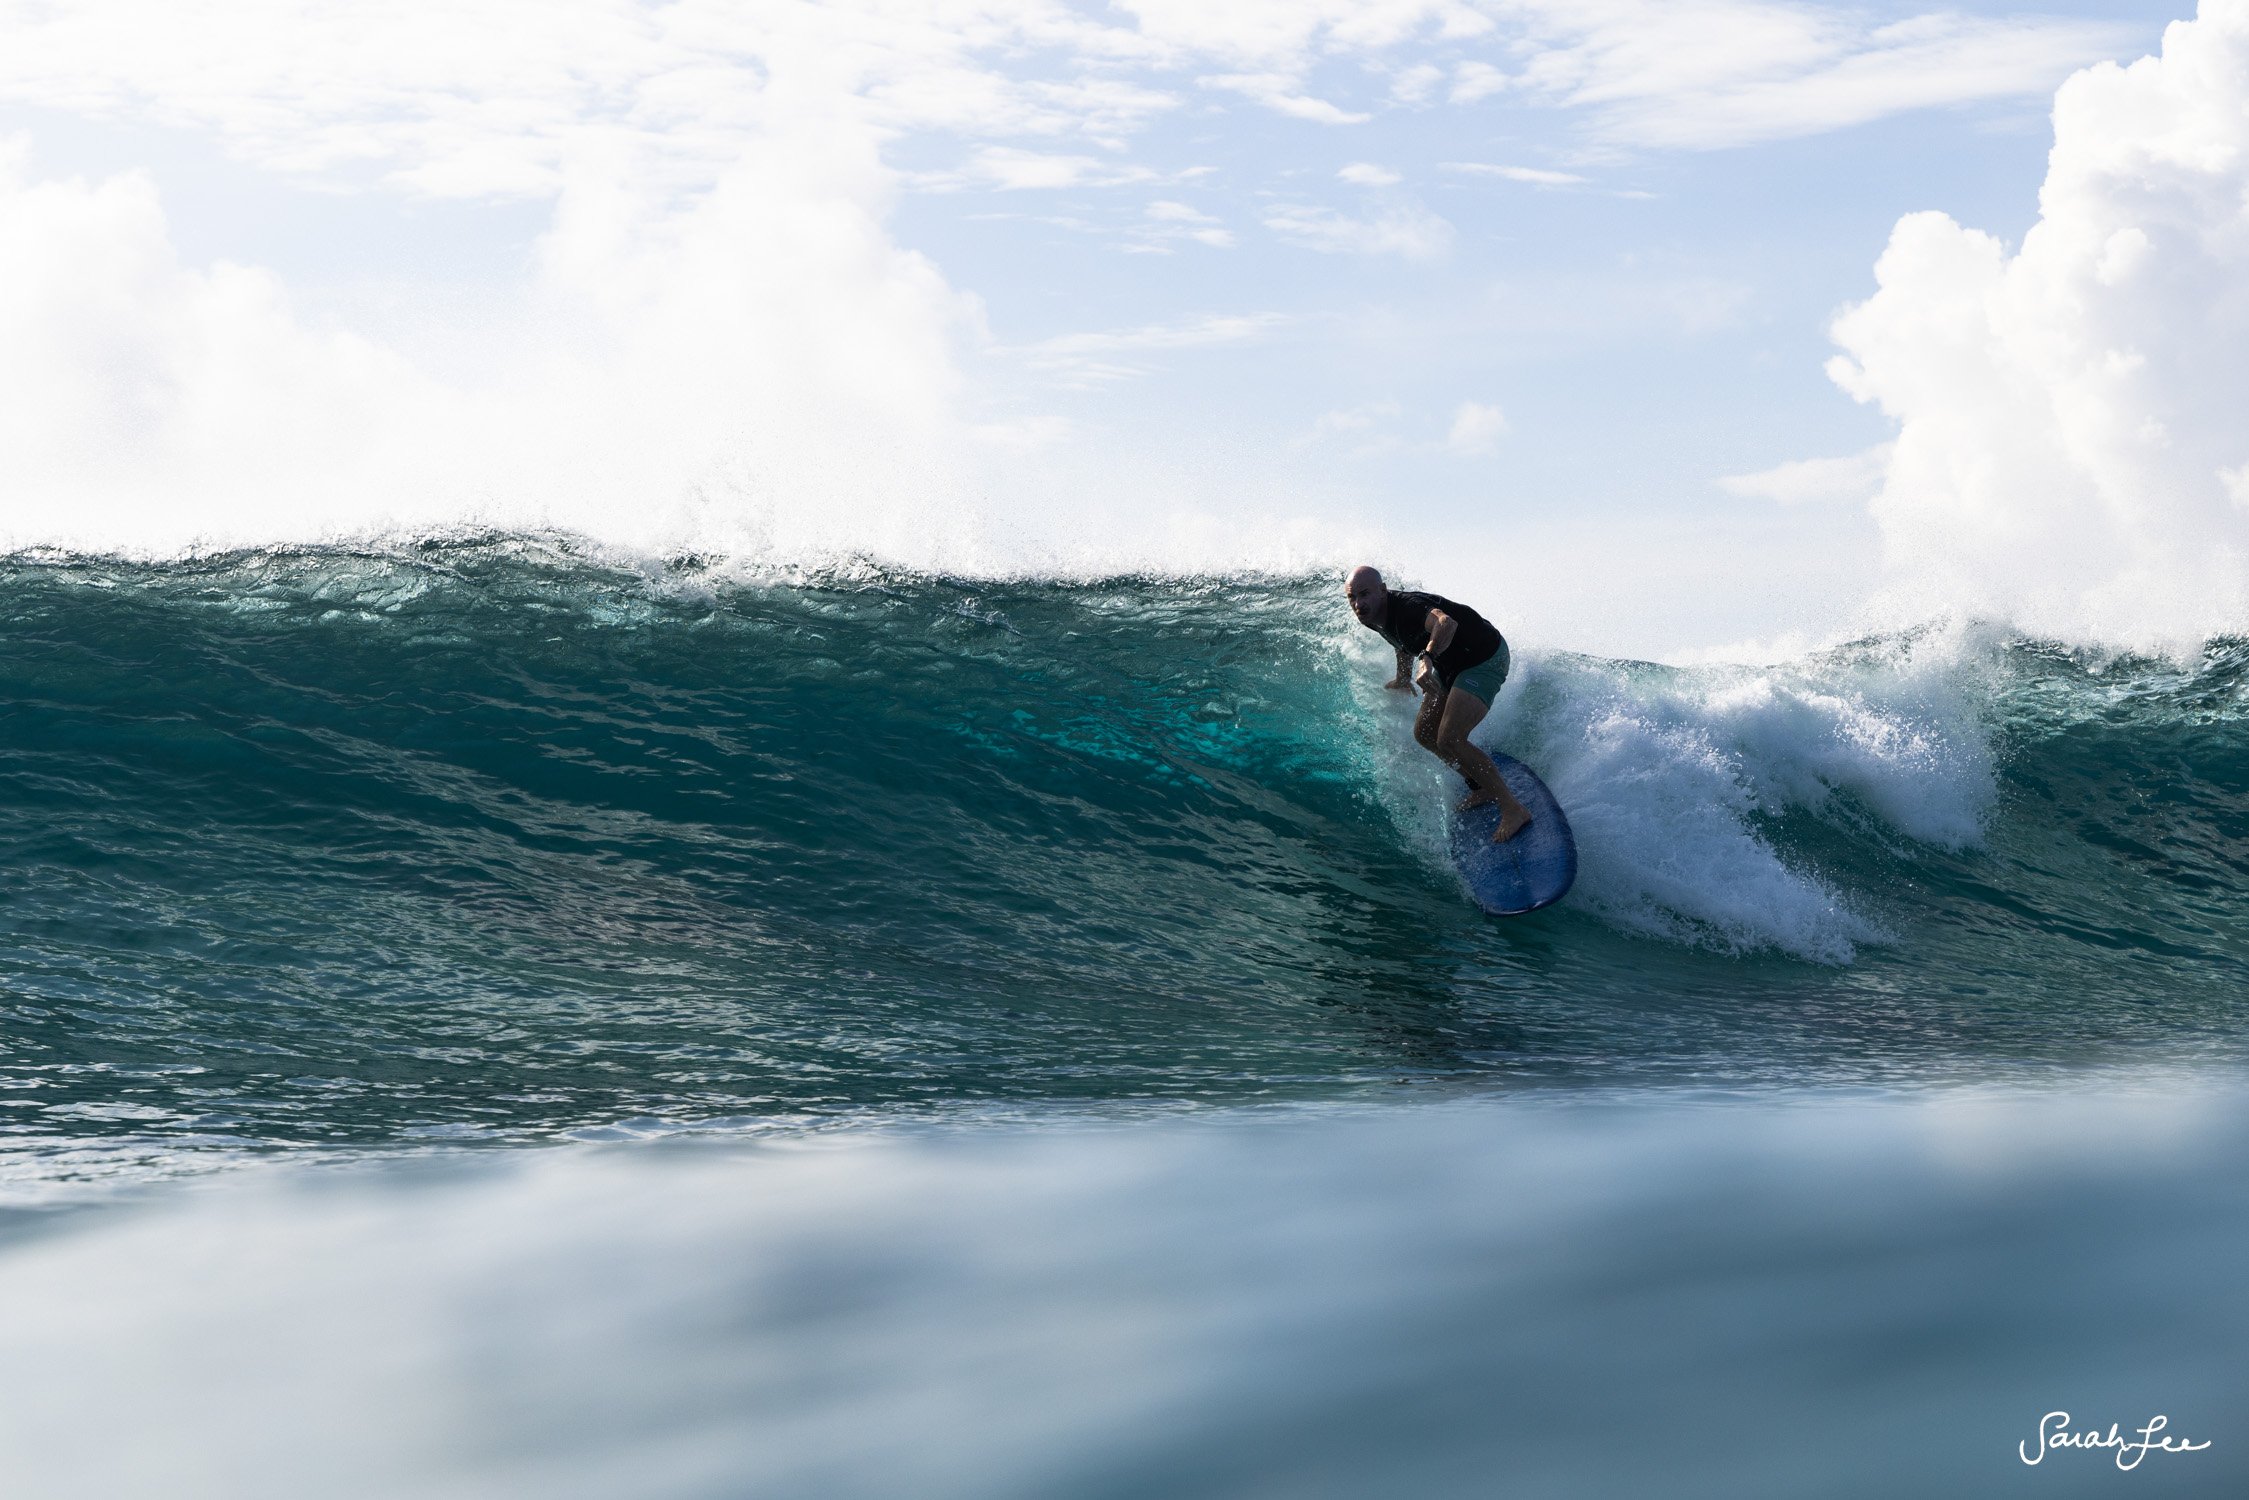 Surfing a Channel Islands Mid Pin 7'5 in the Maldives.